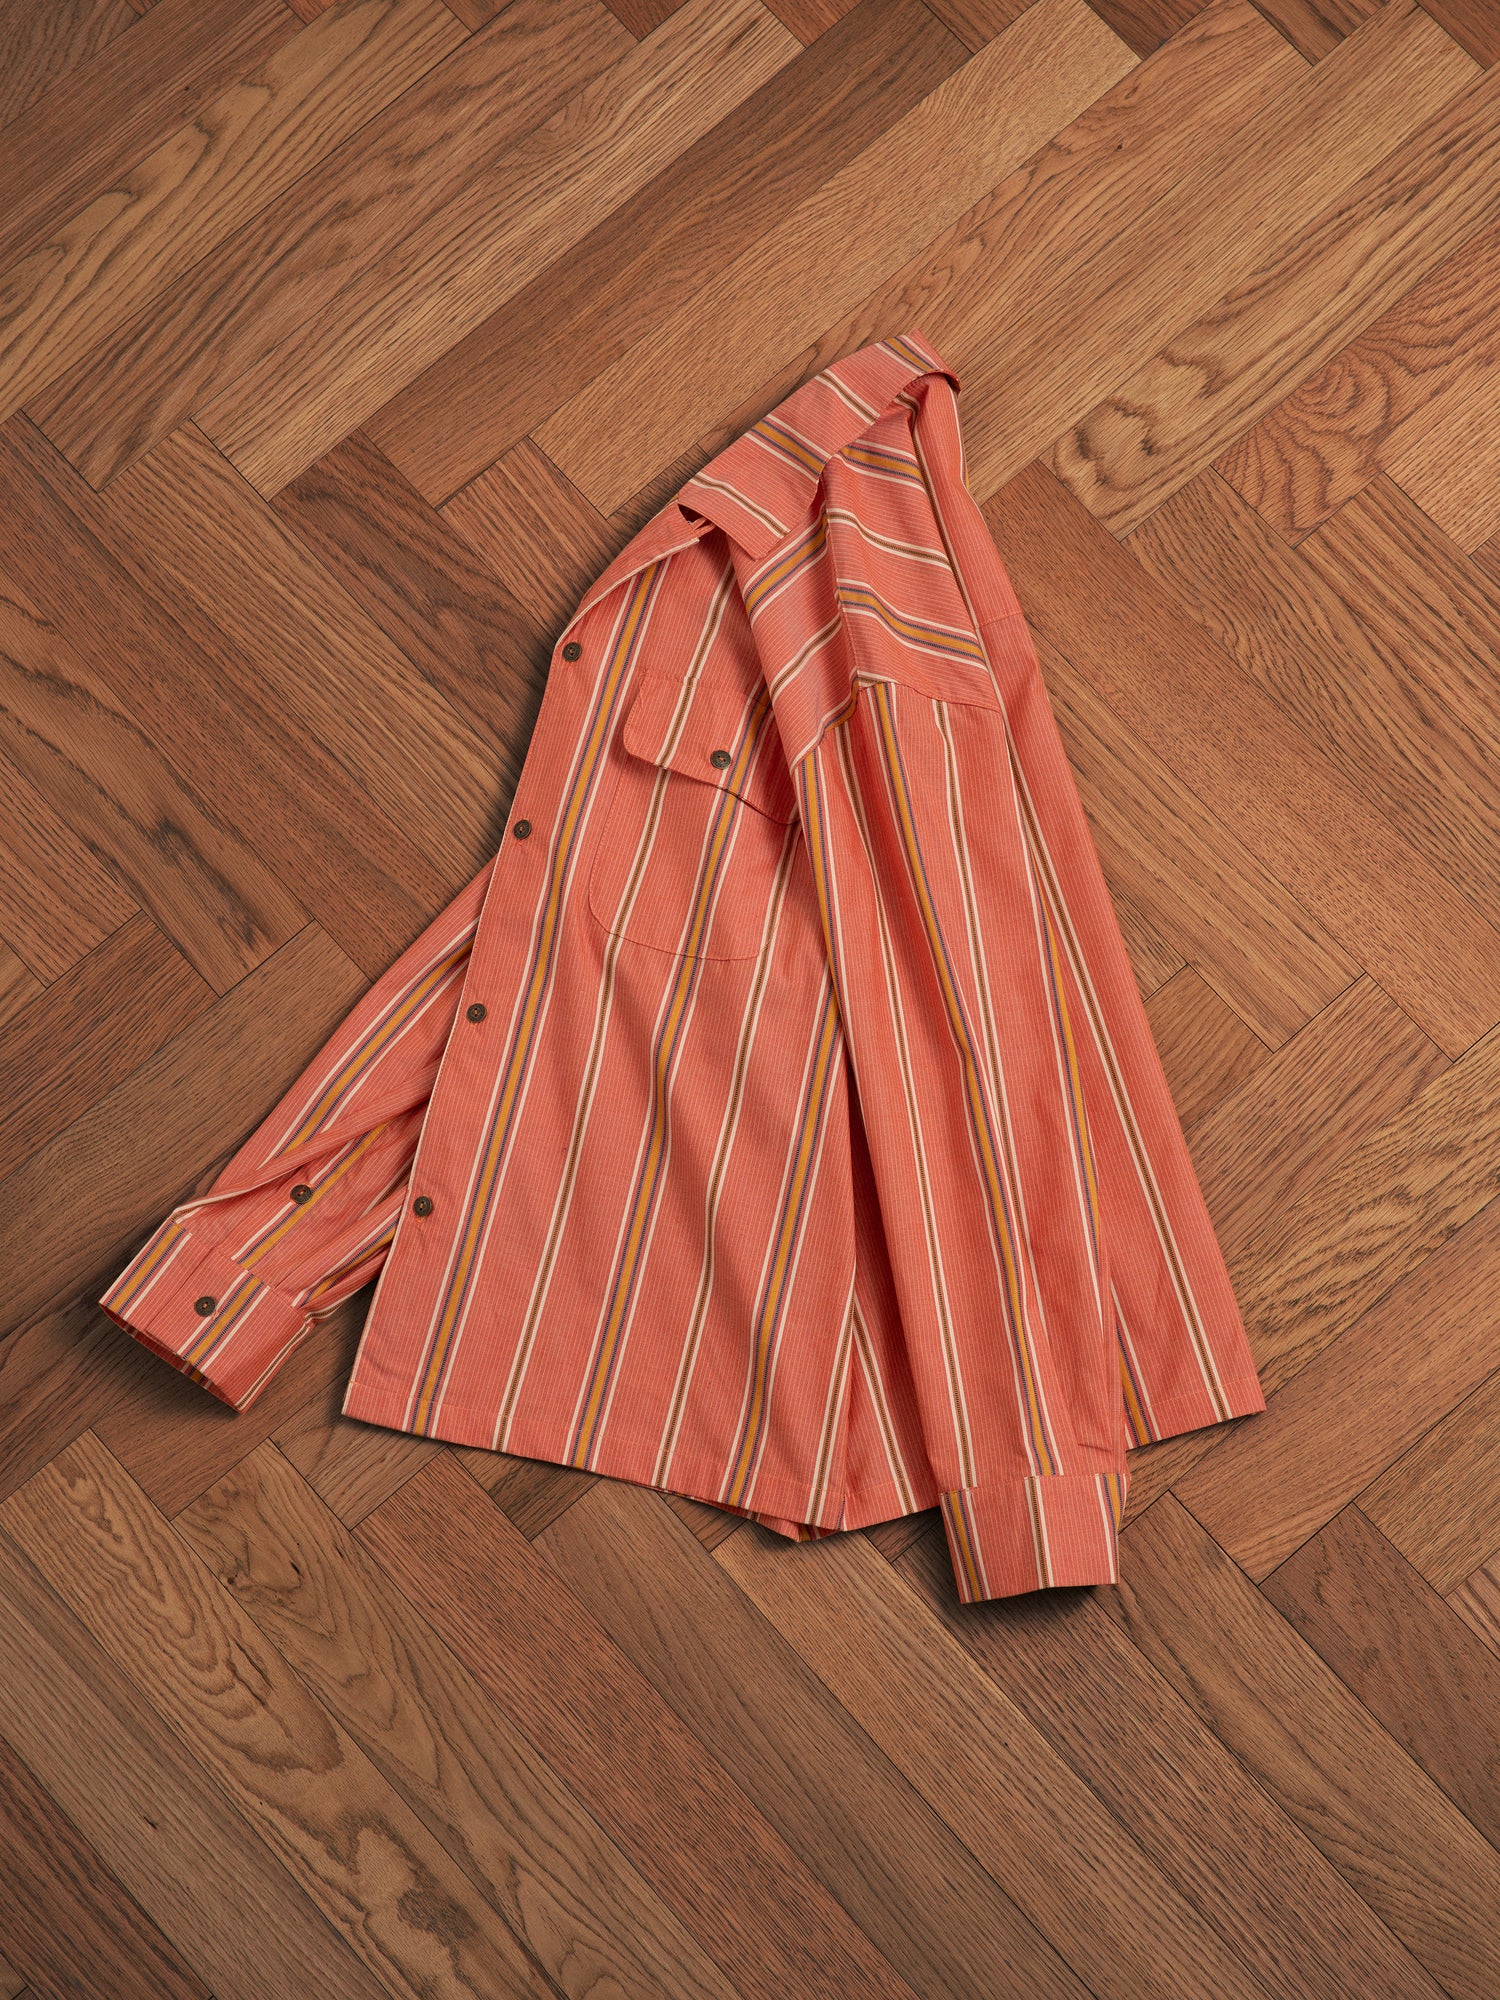 A classic appeal Found Orange Stripe Citrus LS Camp Shirt laying on a wooden floor, creating a timeless silhouette.